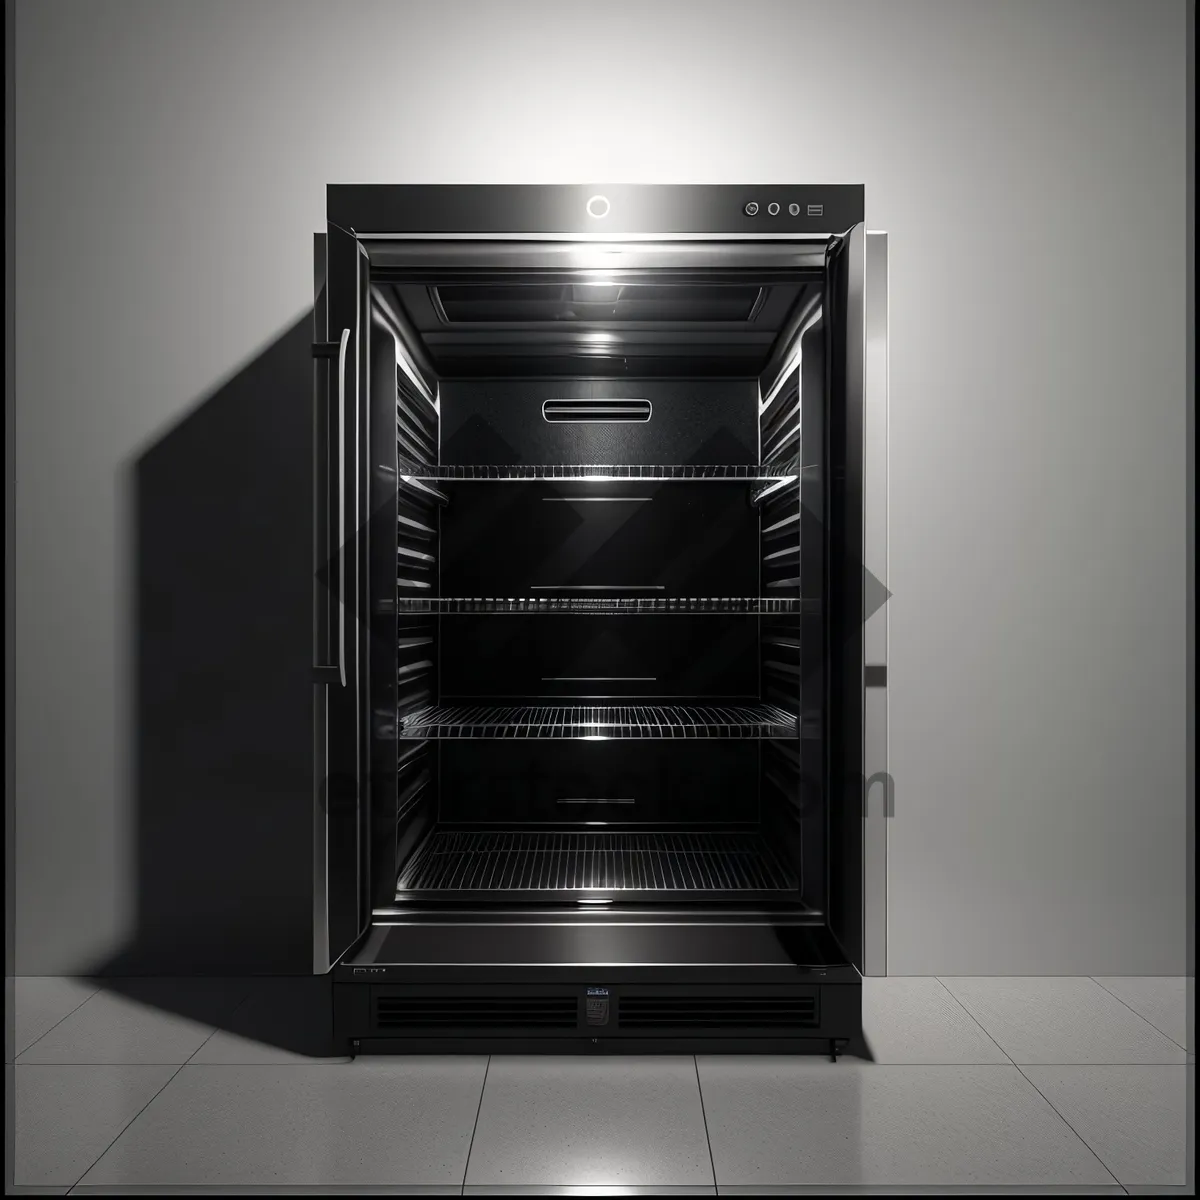 Picture of Modern Kitchen Appliance: Sleek Oven with Rotisserie Feature